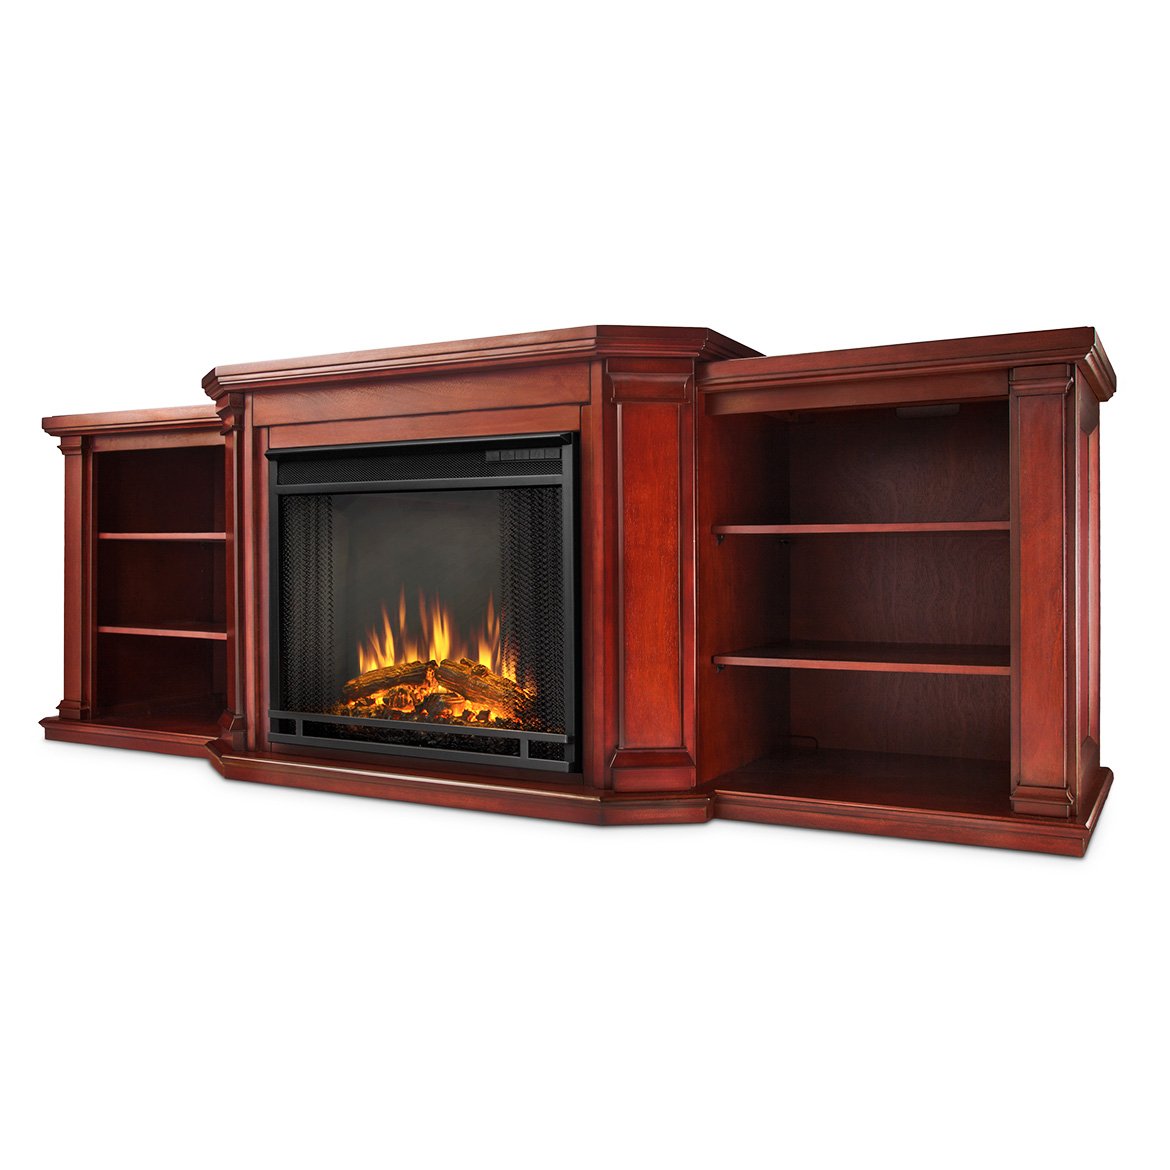 Valmont Media Electric Fireplace in Dark Mahogany by Real Flame